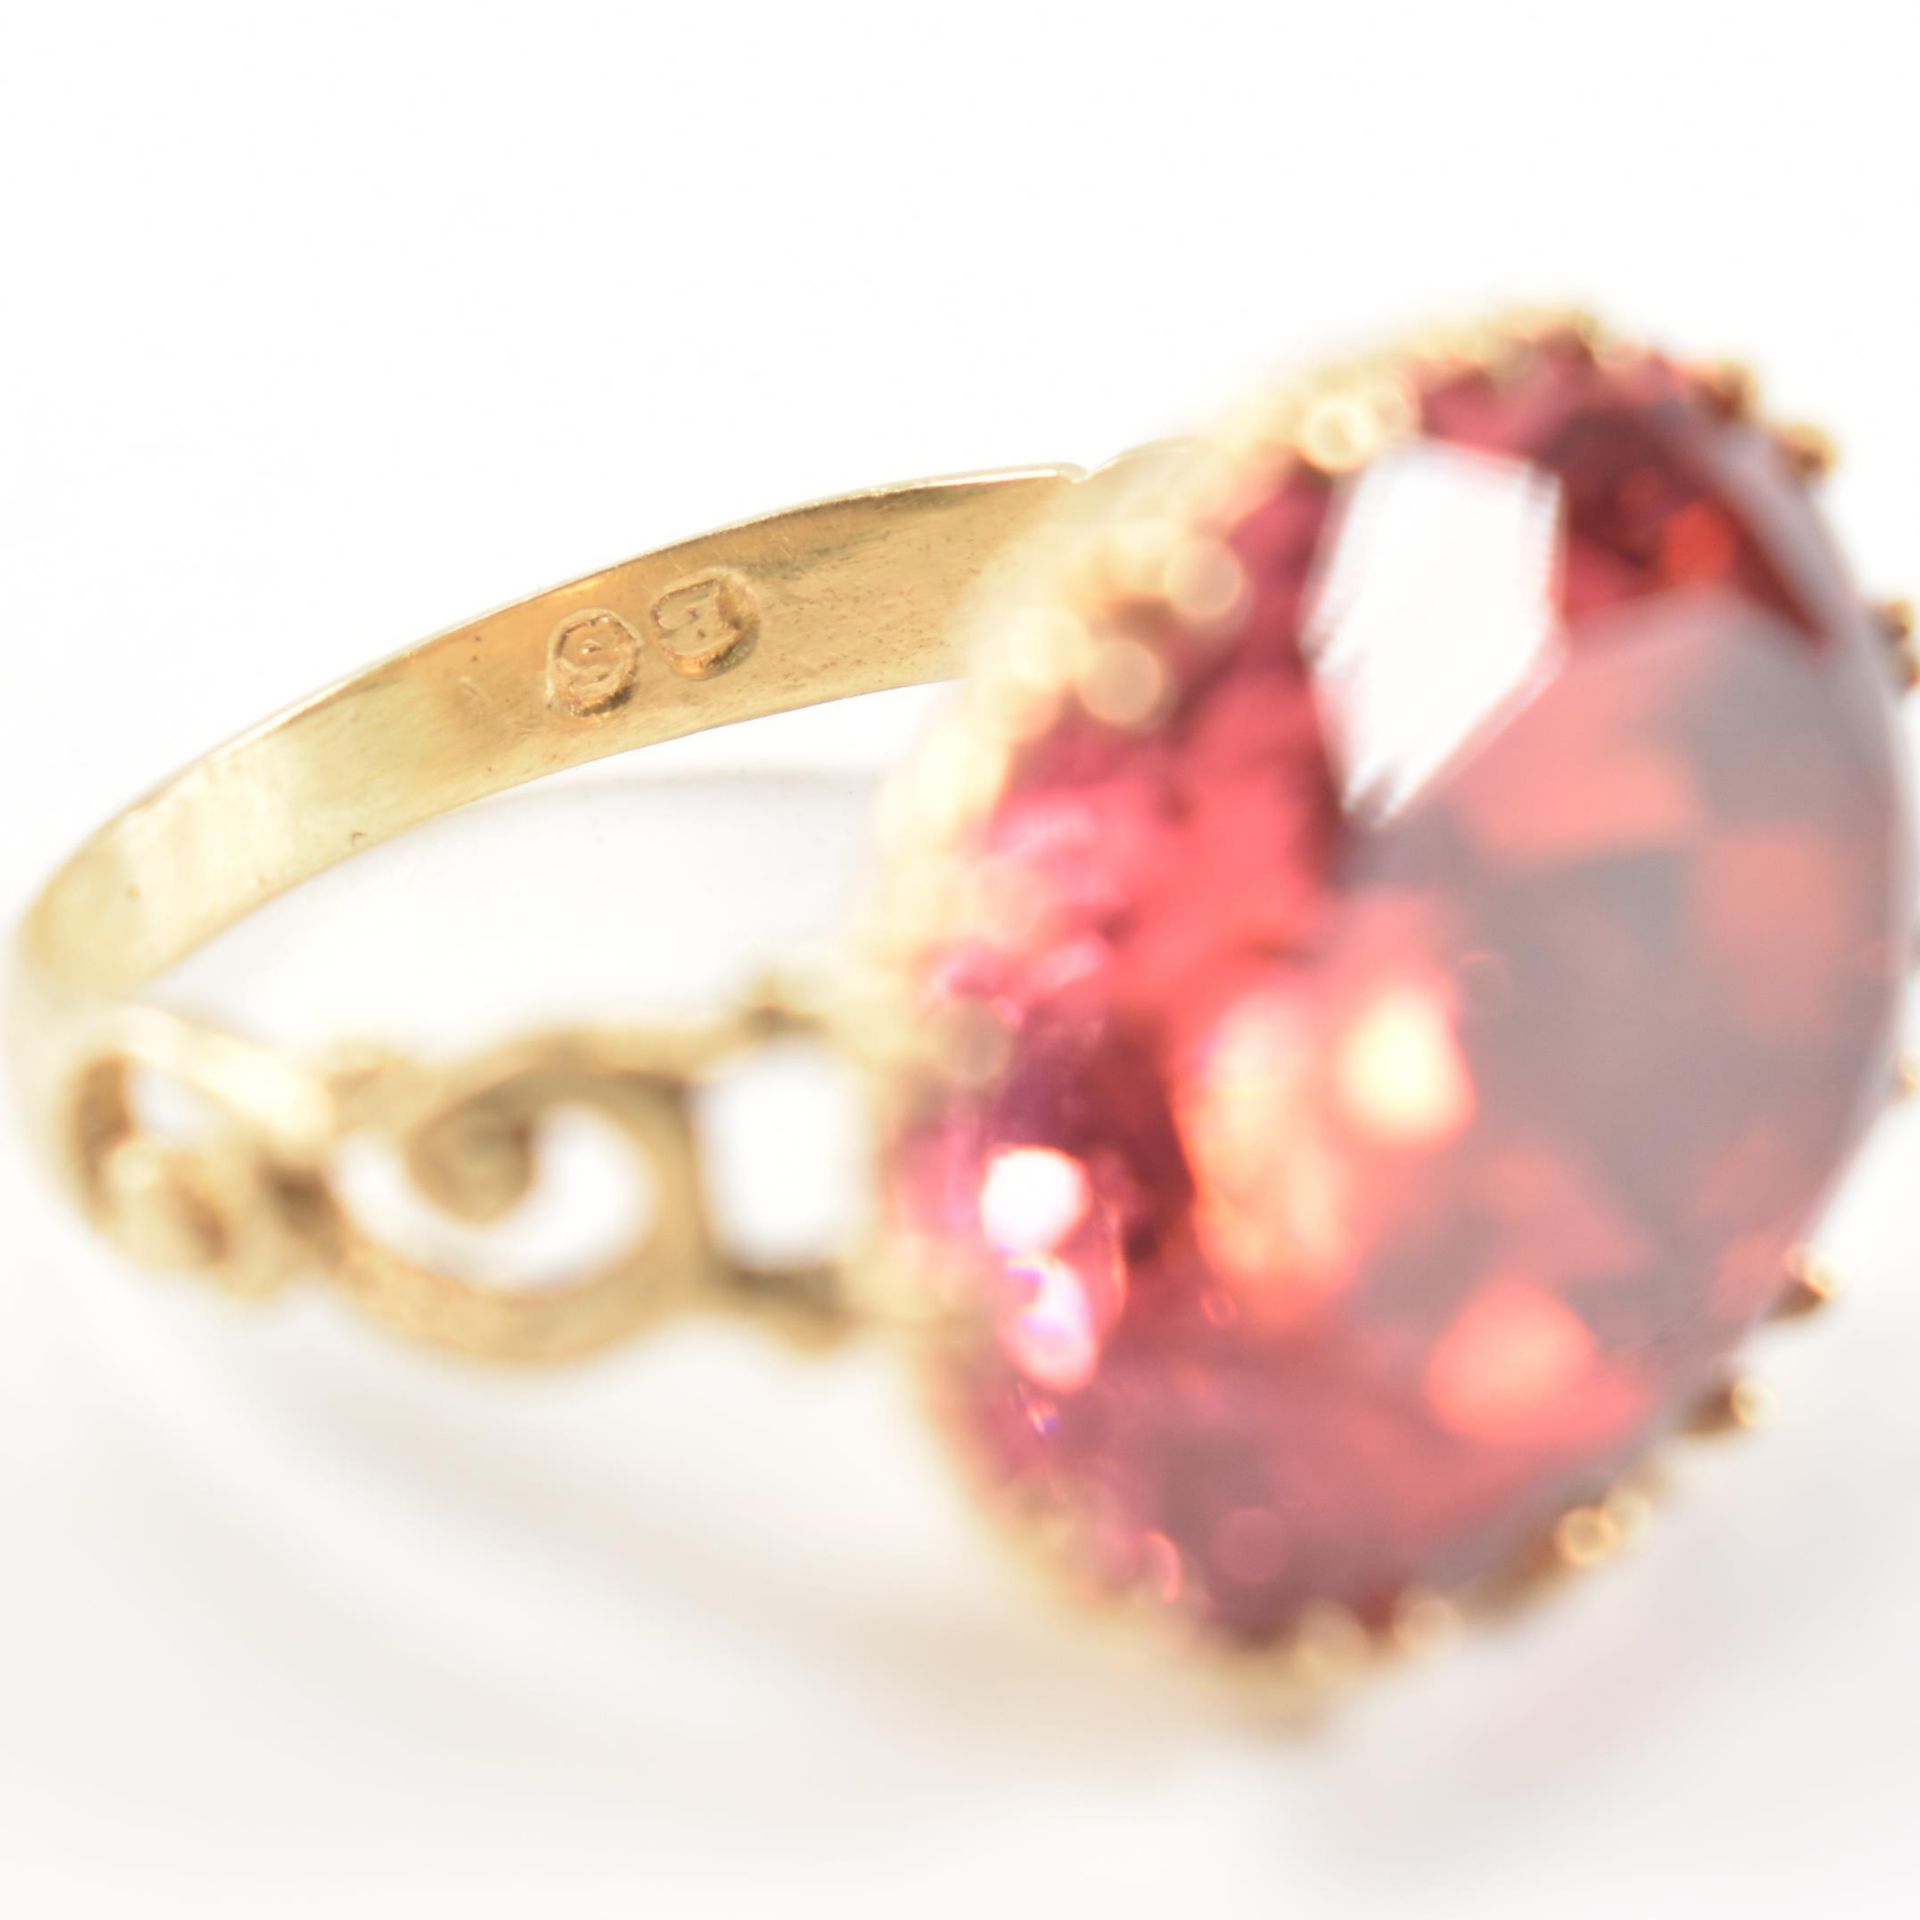 ANTIQUE GOLD & RED PINK PASTE STONE DRESS RING - Image 7 of 8